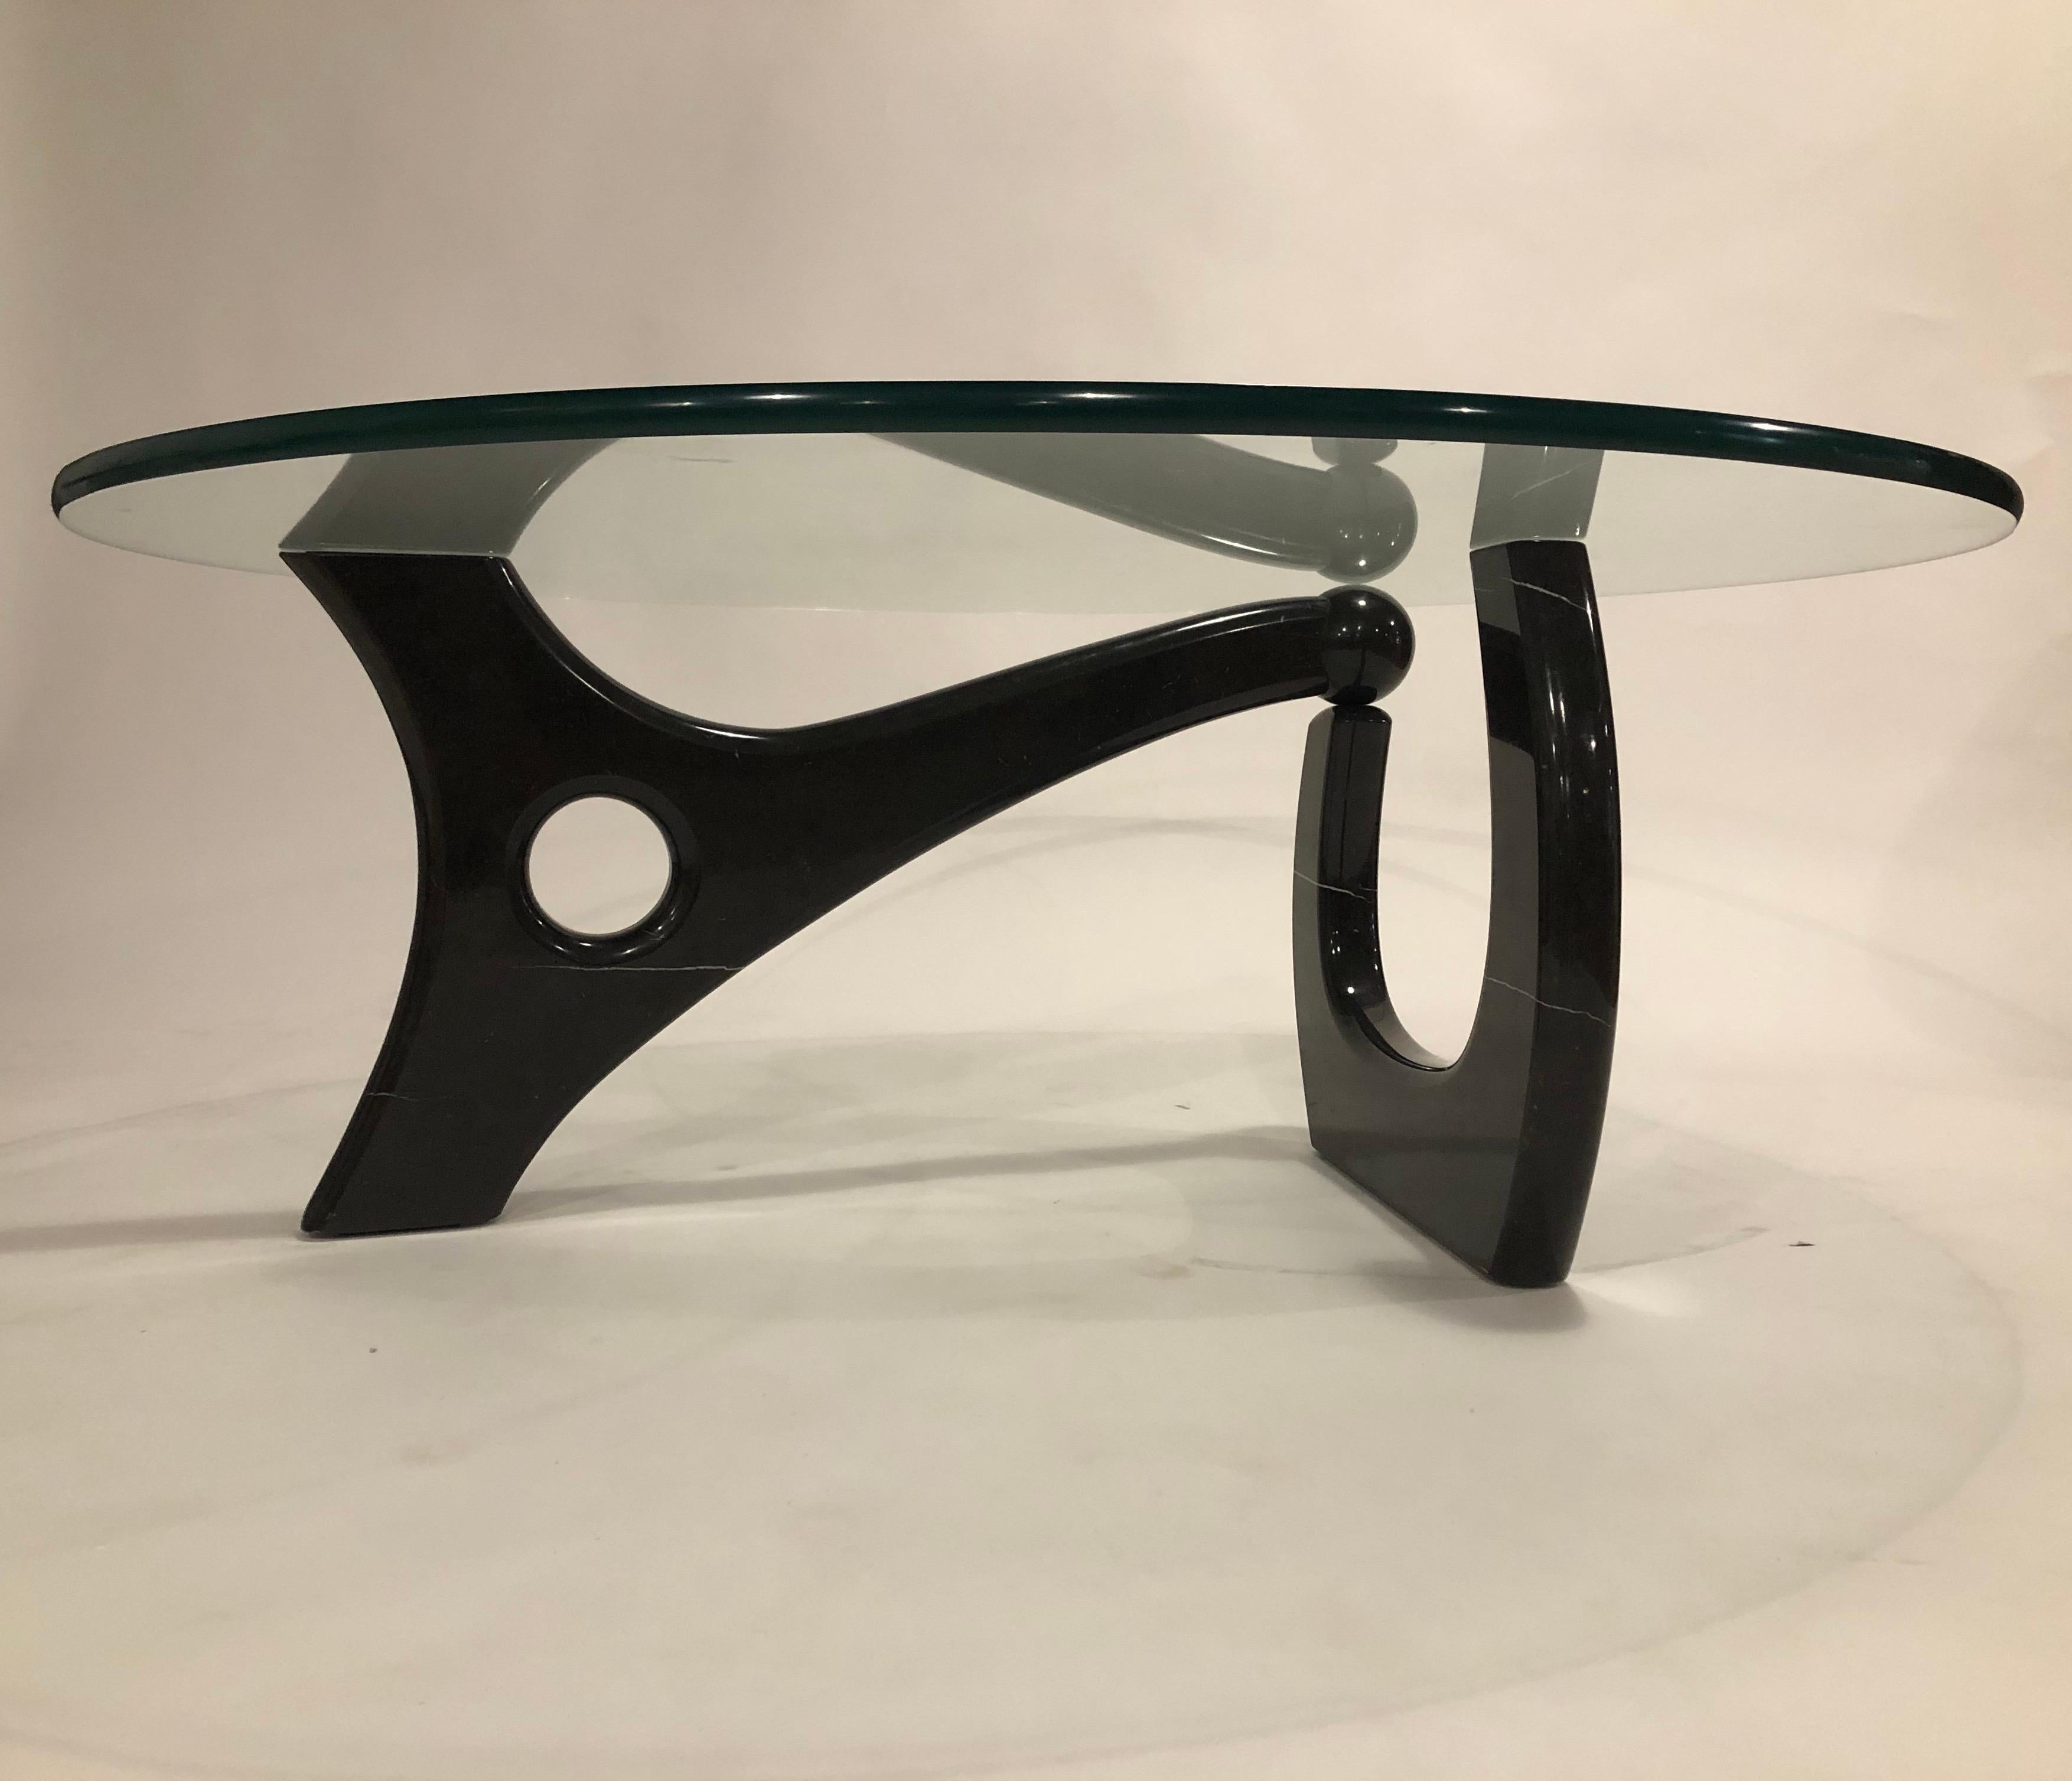 Noguchi-style Postmodern design cocktail table designed by famed Chicago designer Richard Himmel made of onyx and glass. From the Himmel family estate in Chicago. Probably dates to early 1980s. Shown with a 3/4' round glass but the base can be